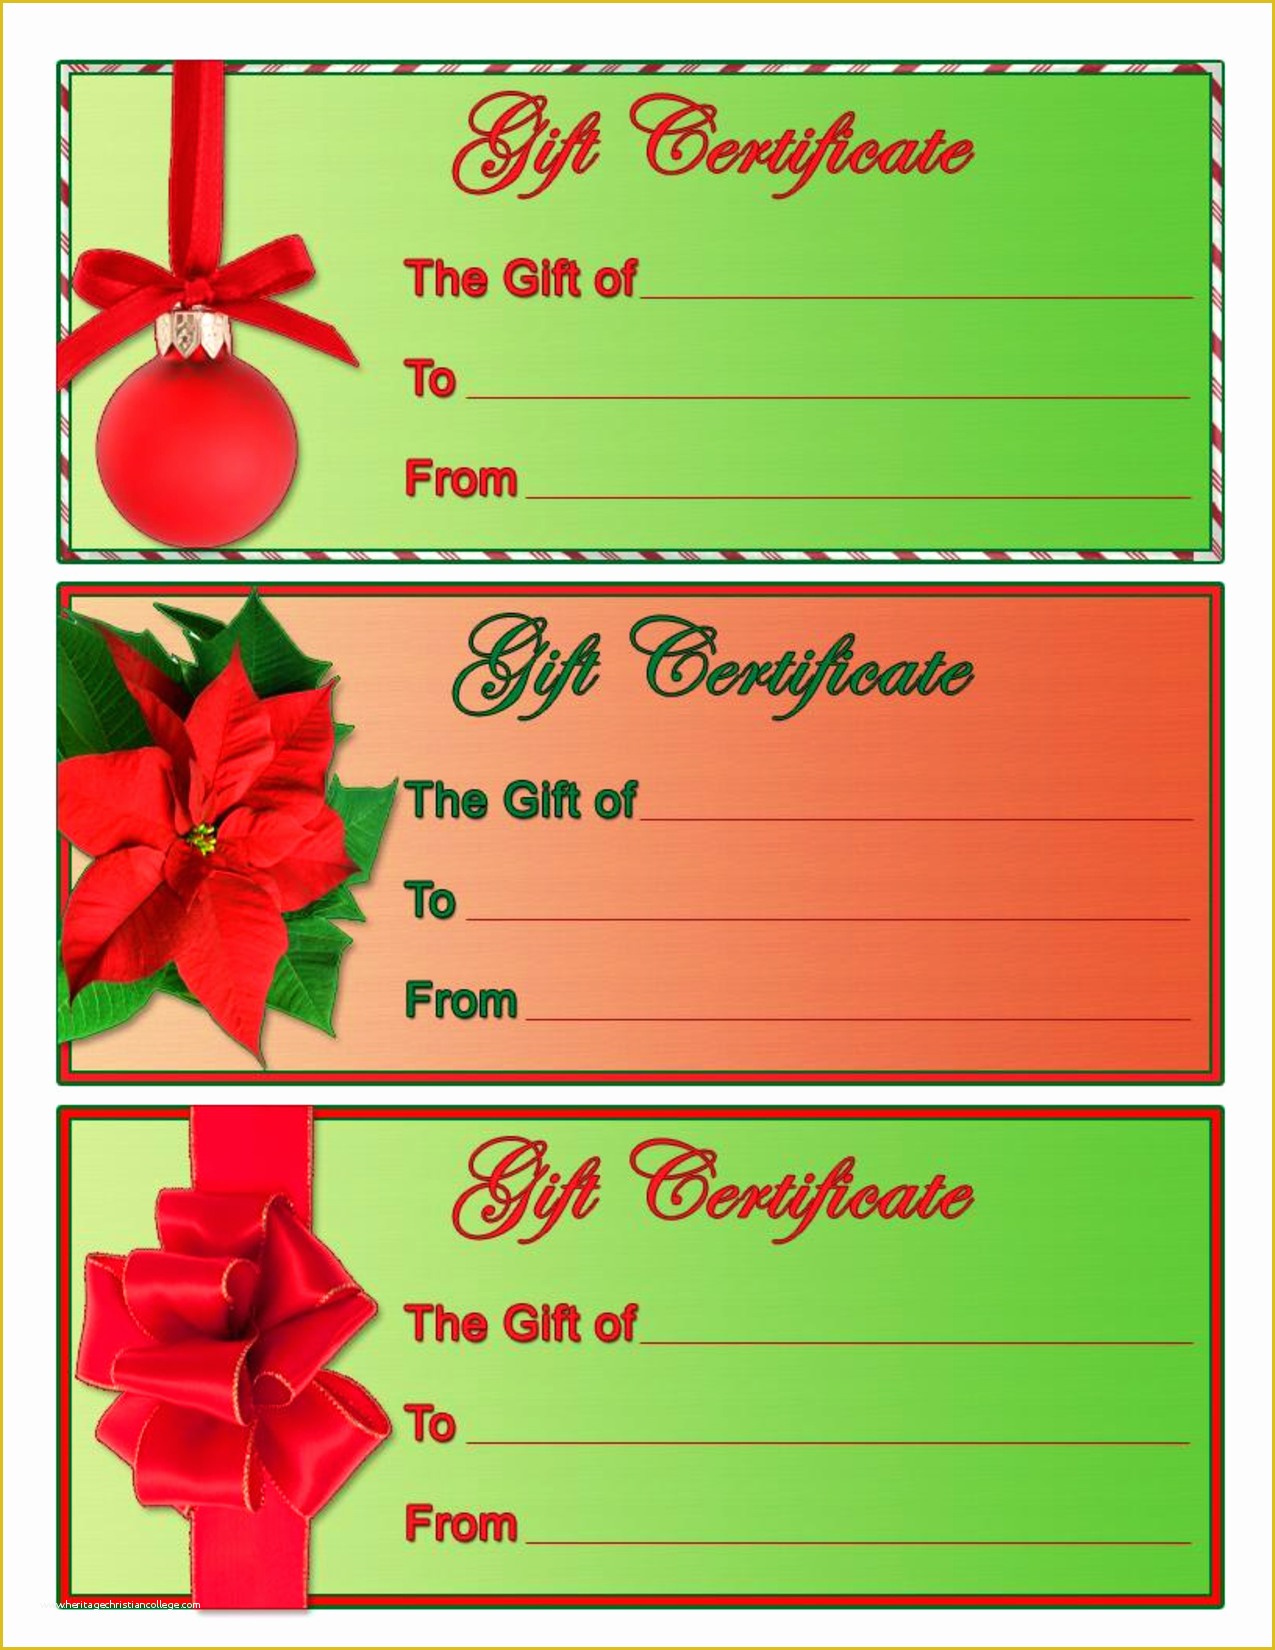 custom-gift-certificate-templates-for-microsoft-word